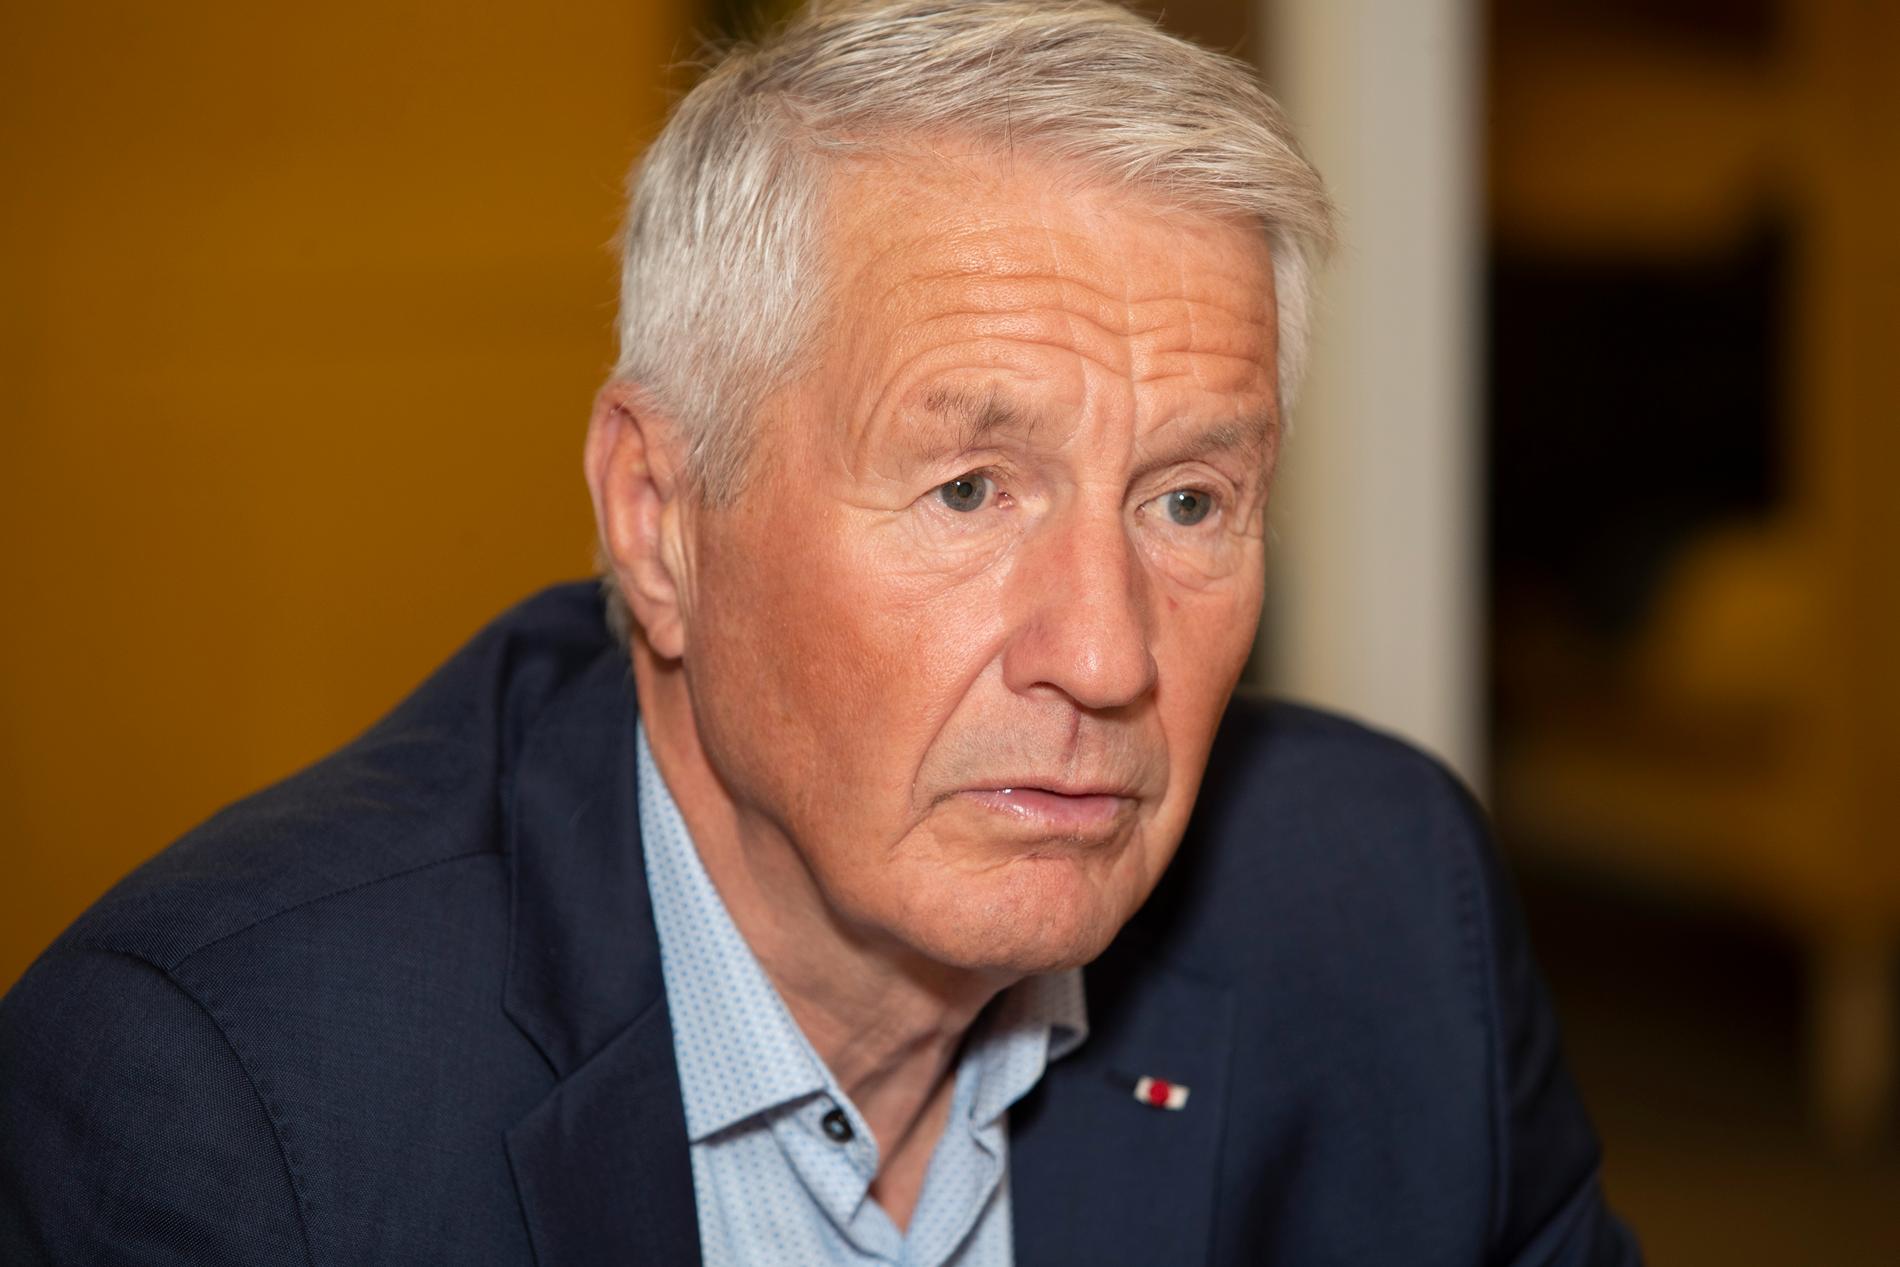 Former Prime Minister Thorbjörn Jagland admitted that he, among others, met Epstein in 2013. 